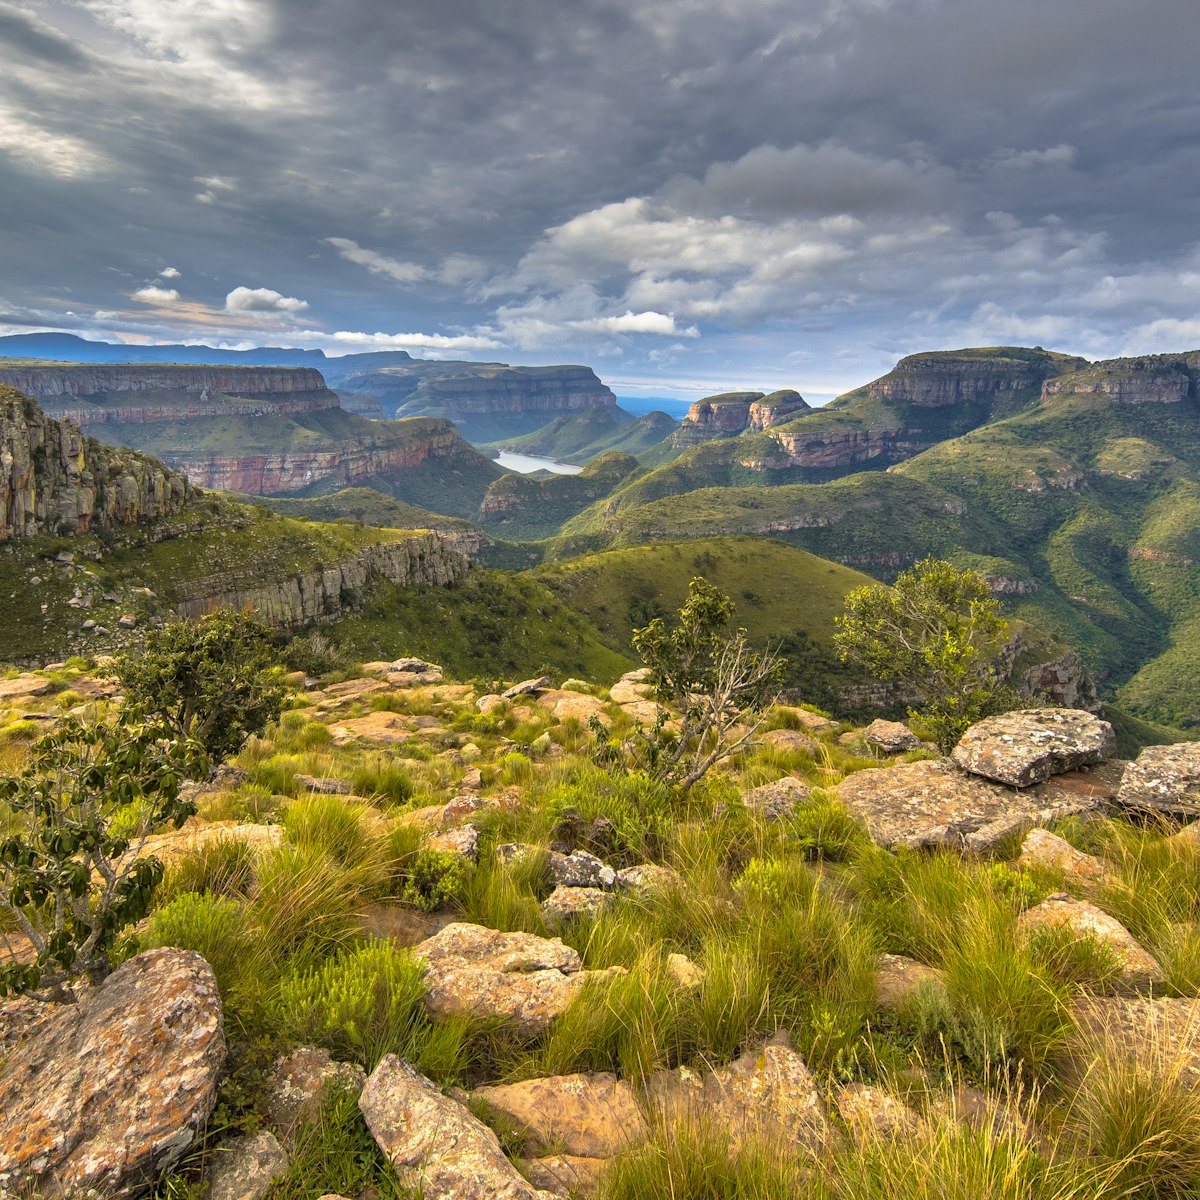 View of Blyde River Canyon from Lowveld Viewpoint in Mpumalanga, South Africa.